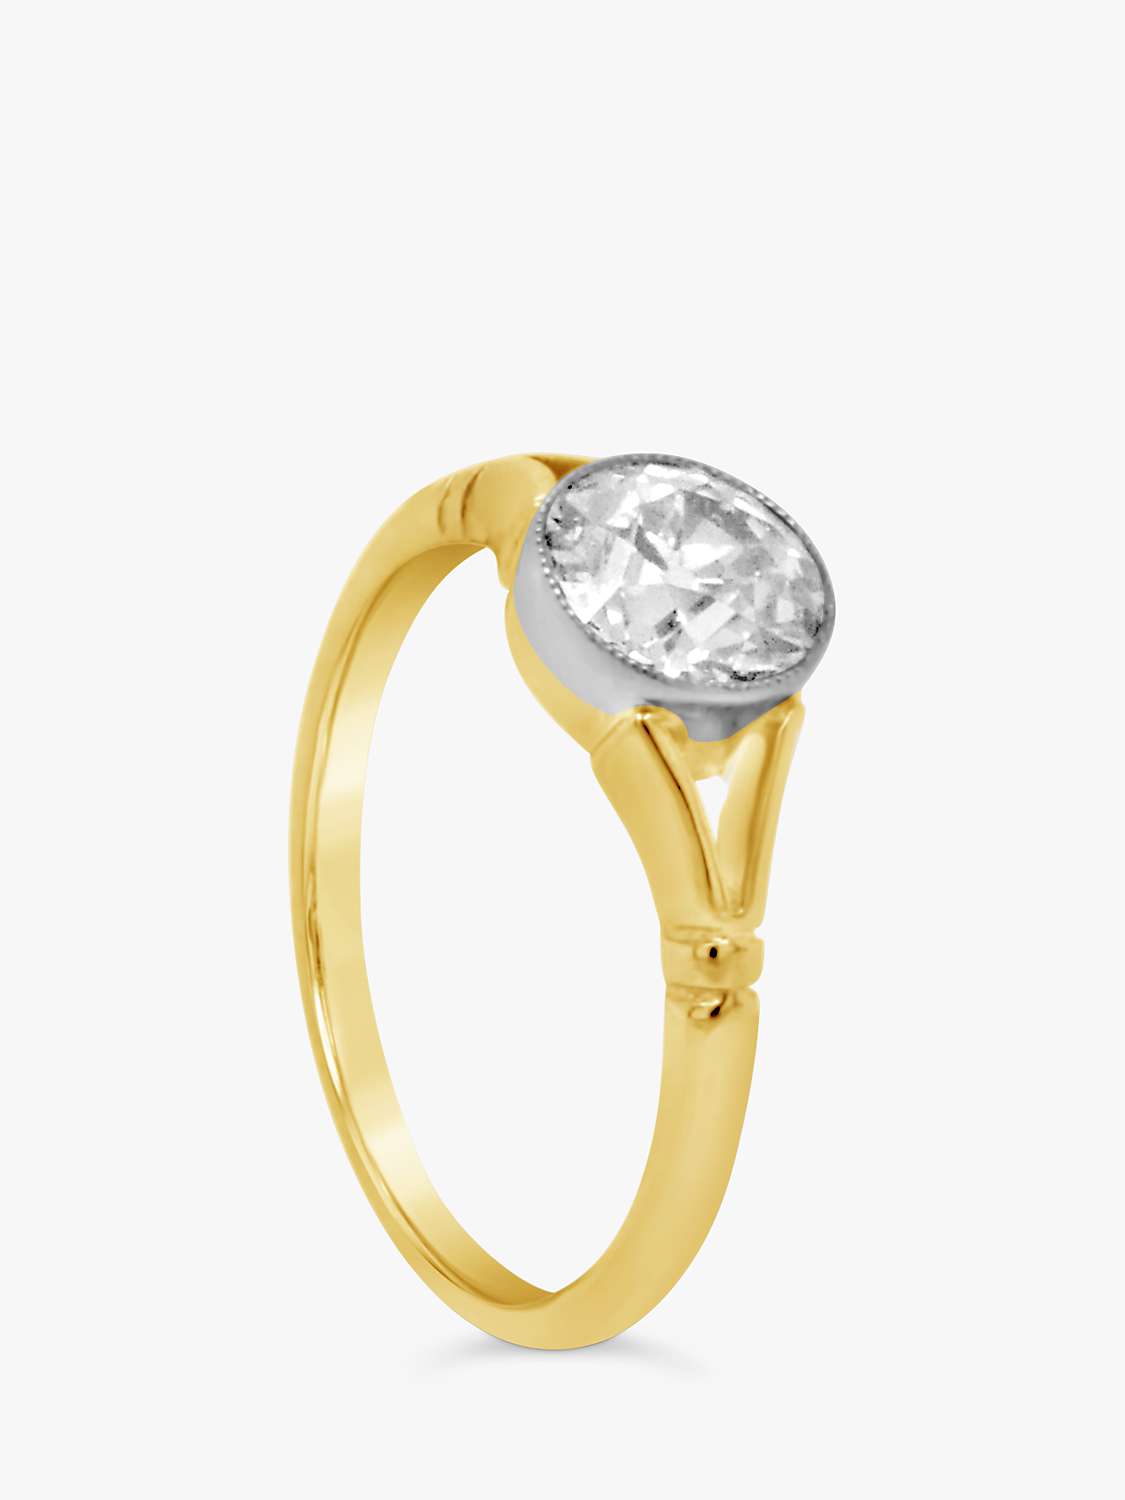 Buy Milton & Humble Jewellery Second Hand 18ct White & Yellow Gold Old Cut Diamond Ring, Dated 1910/11 Online at johnlewis.com